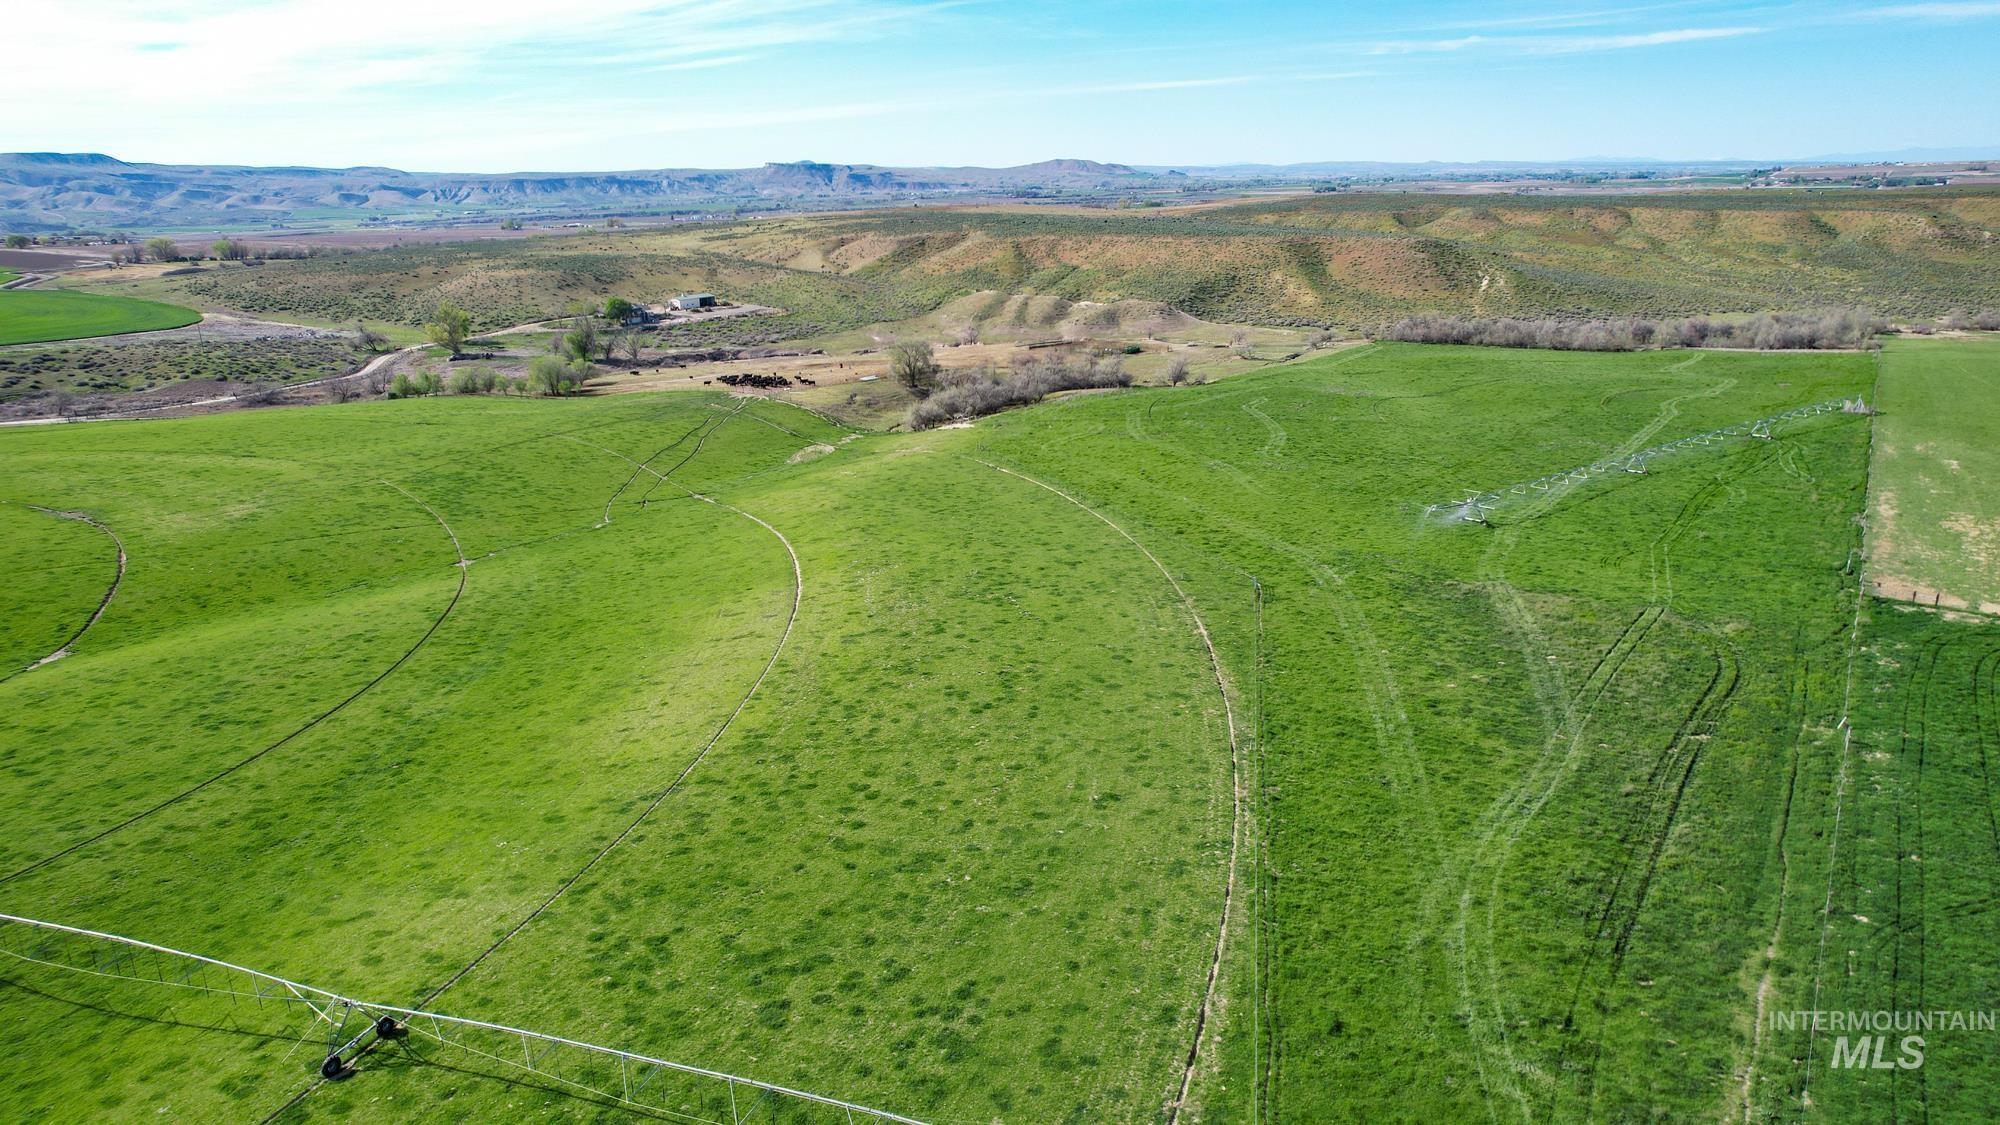 TBD Hill Road, Homedale, Idaho 83628, Farm & Ranch For Sale, Price $1,073,820,MLS 98903009